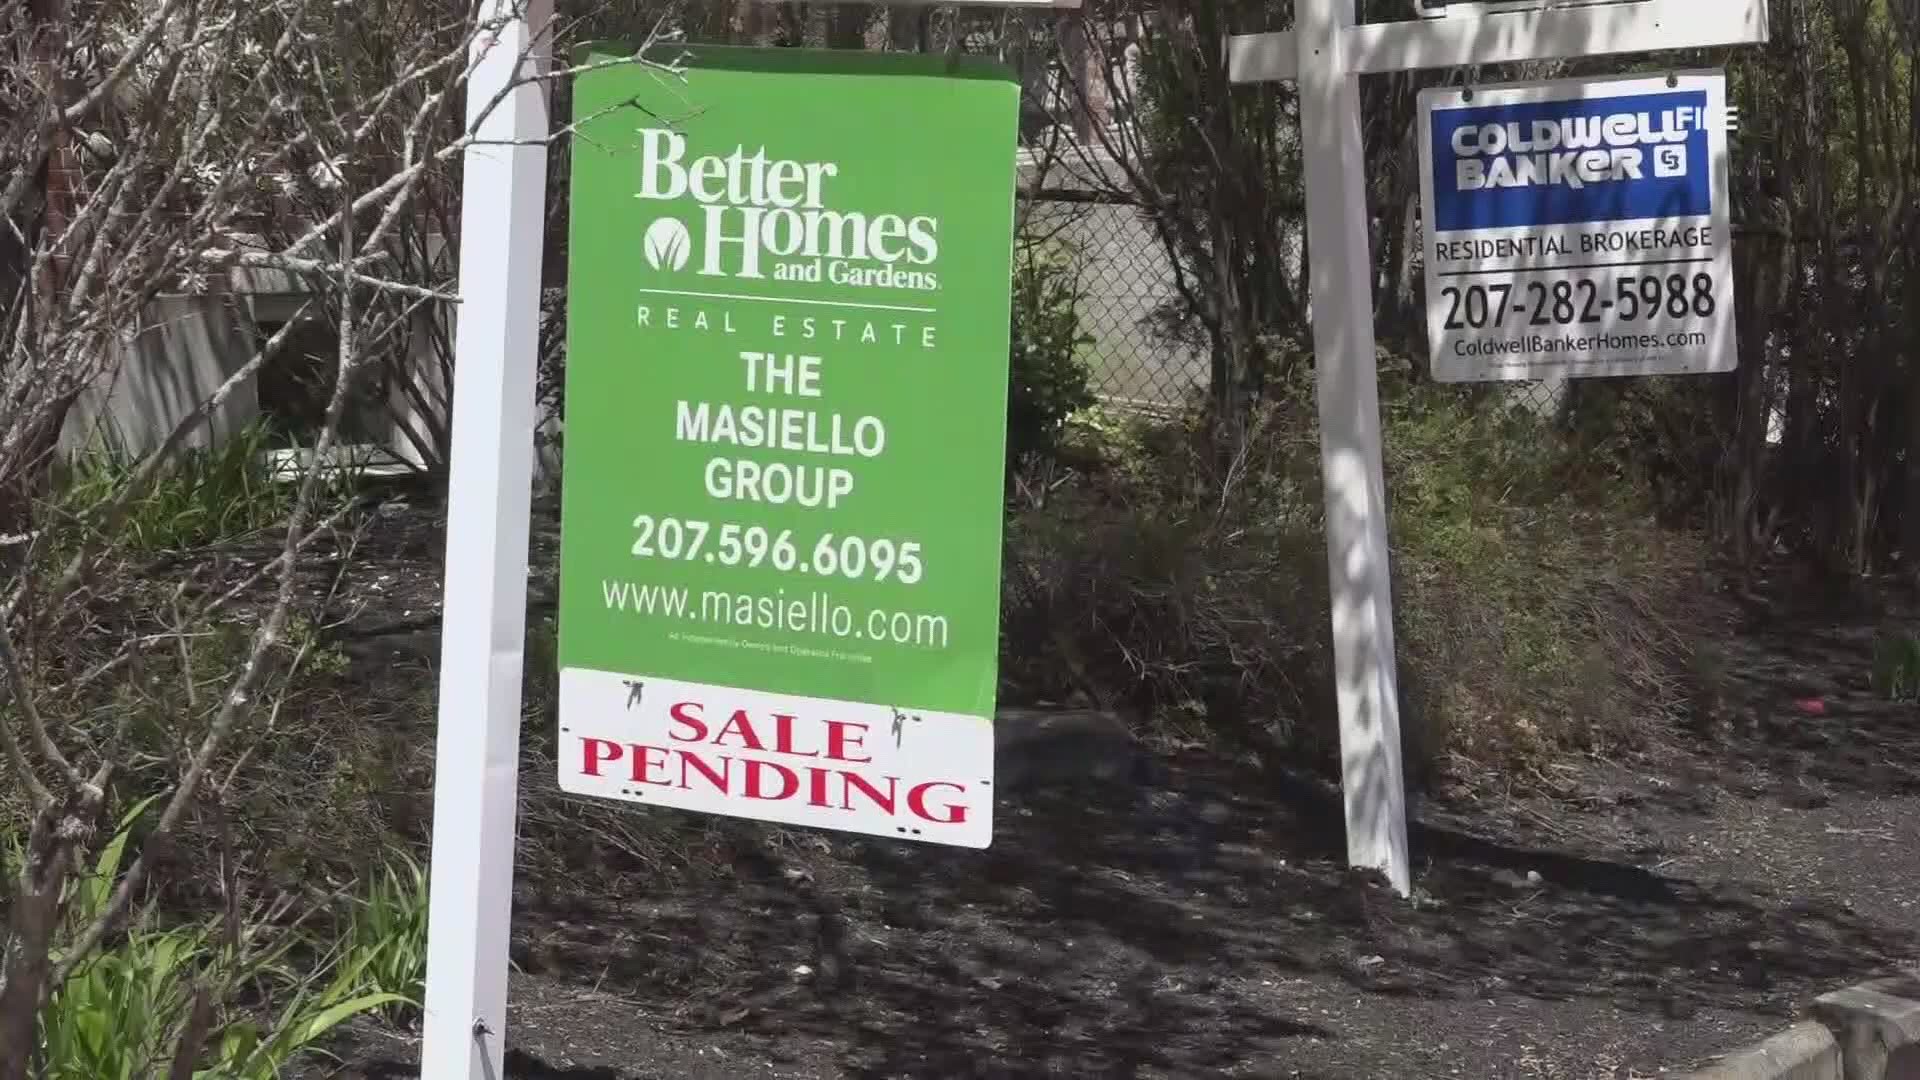 New Data from MaineBiz suggests that many who are coming from out-of-state are looking to purchase 2nd homes.